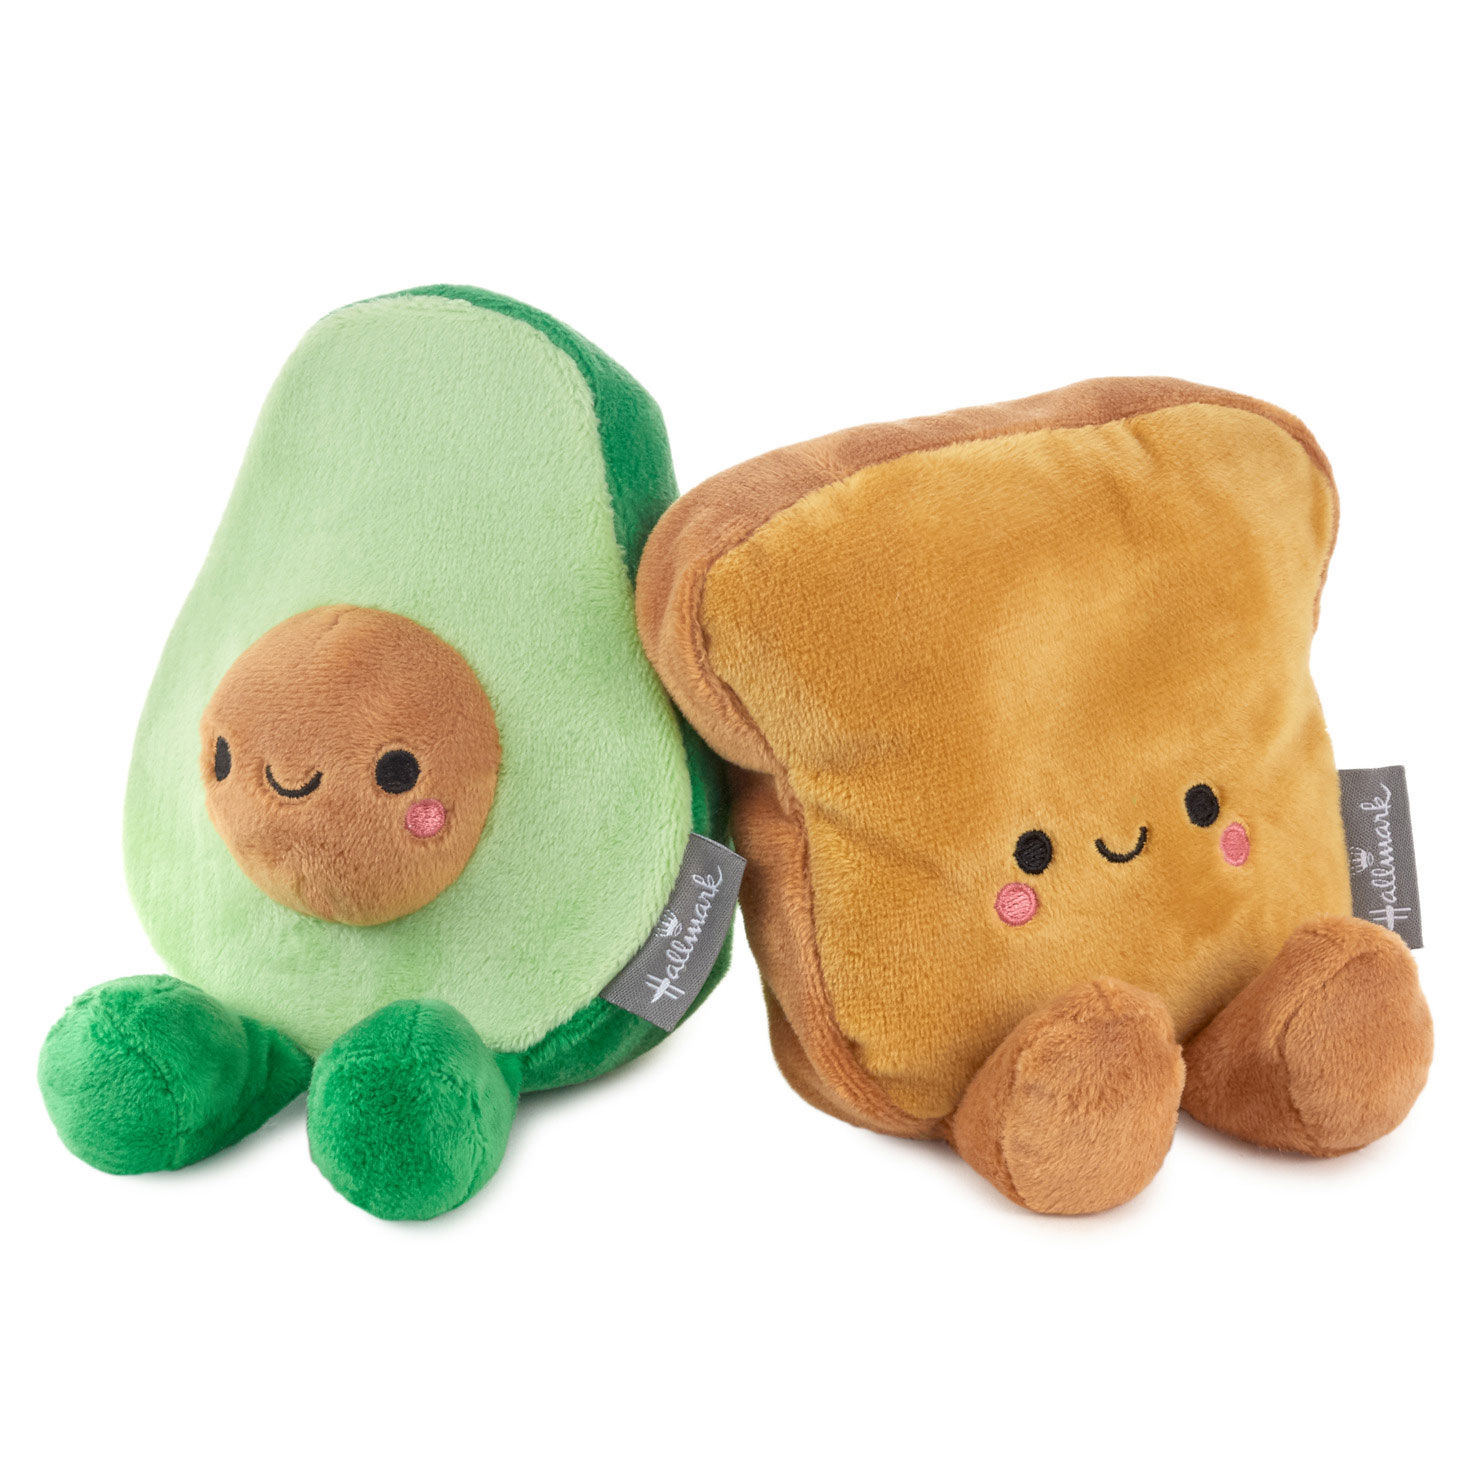 Better Together Avocado and Toast Magnetic Plush, 5" for only USD 16.99 | Hallmark